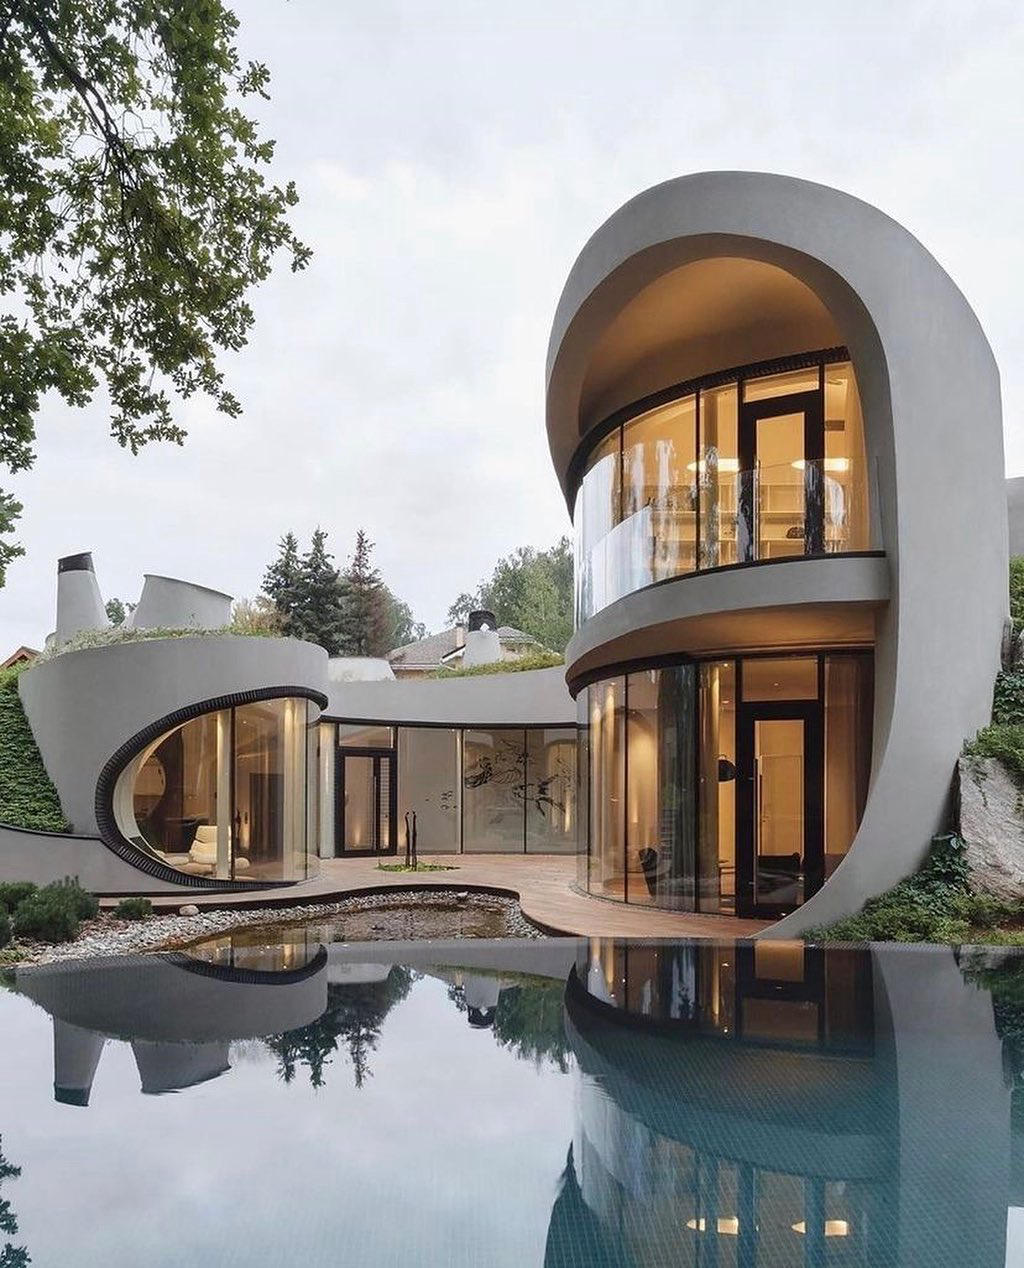 image  1 Taste for Design - Curvaceous and modern, just how we like it